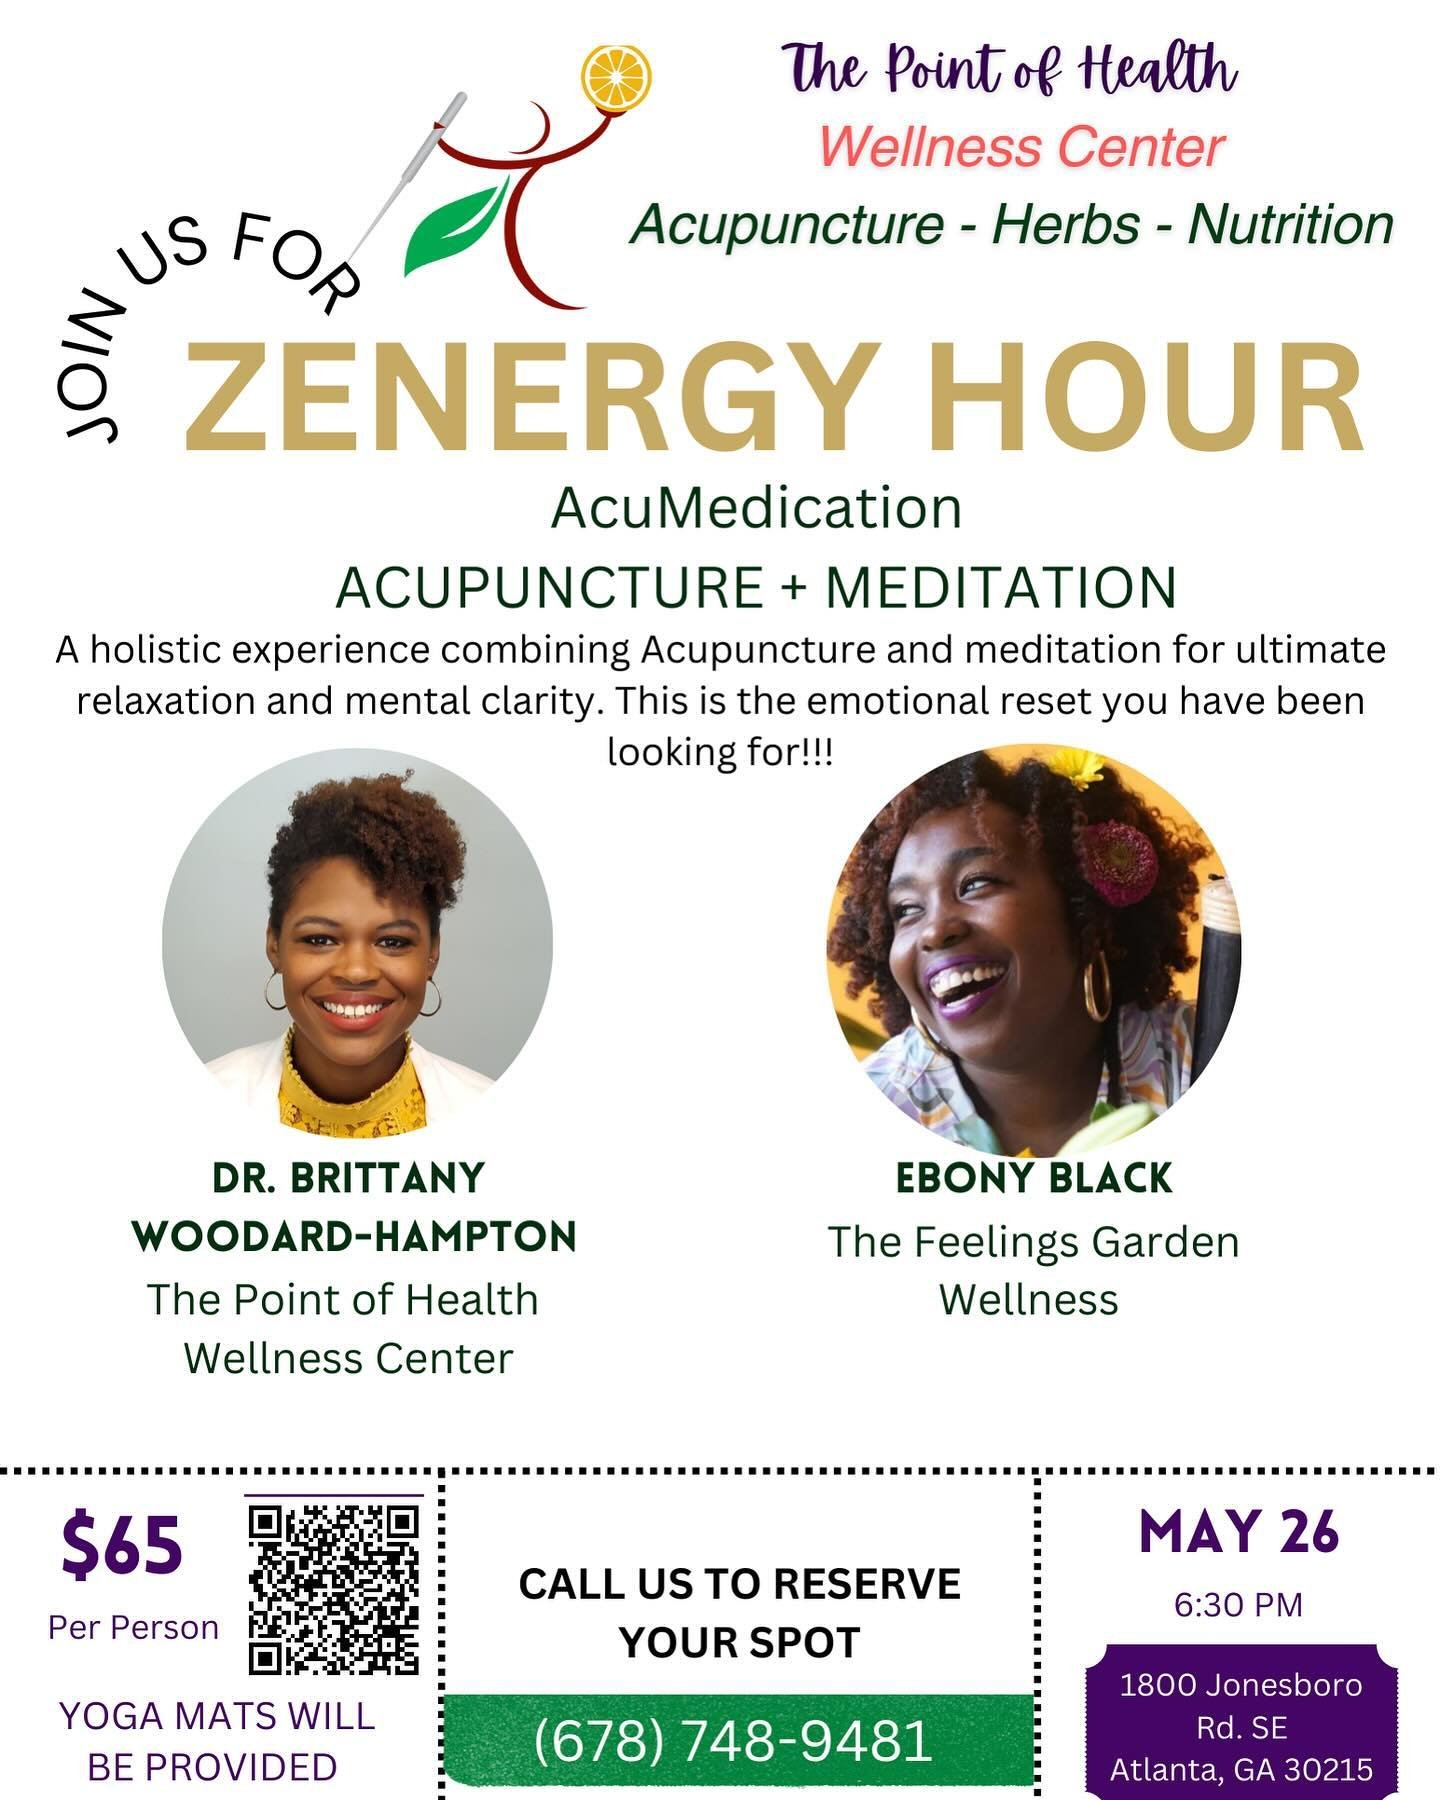 Zenergy Hour: AcuMeditation
6:30 pm Sunday, May 26th

A holistic experience combining acupuncture and meditation for ultimate relaxation. This is the emotional reset you have been looking for!!!

Featuring:

Dr. Brittany Woodard-Hampton 
The Point of